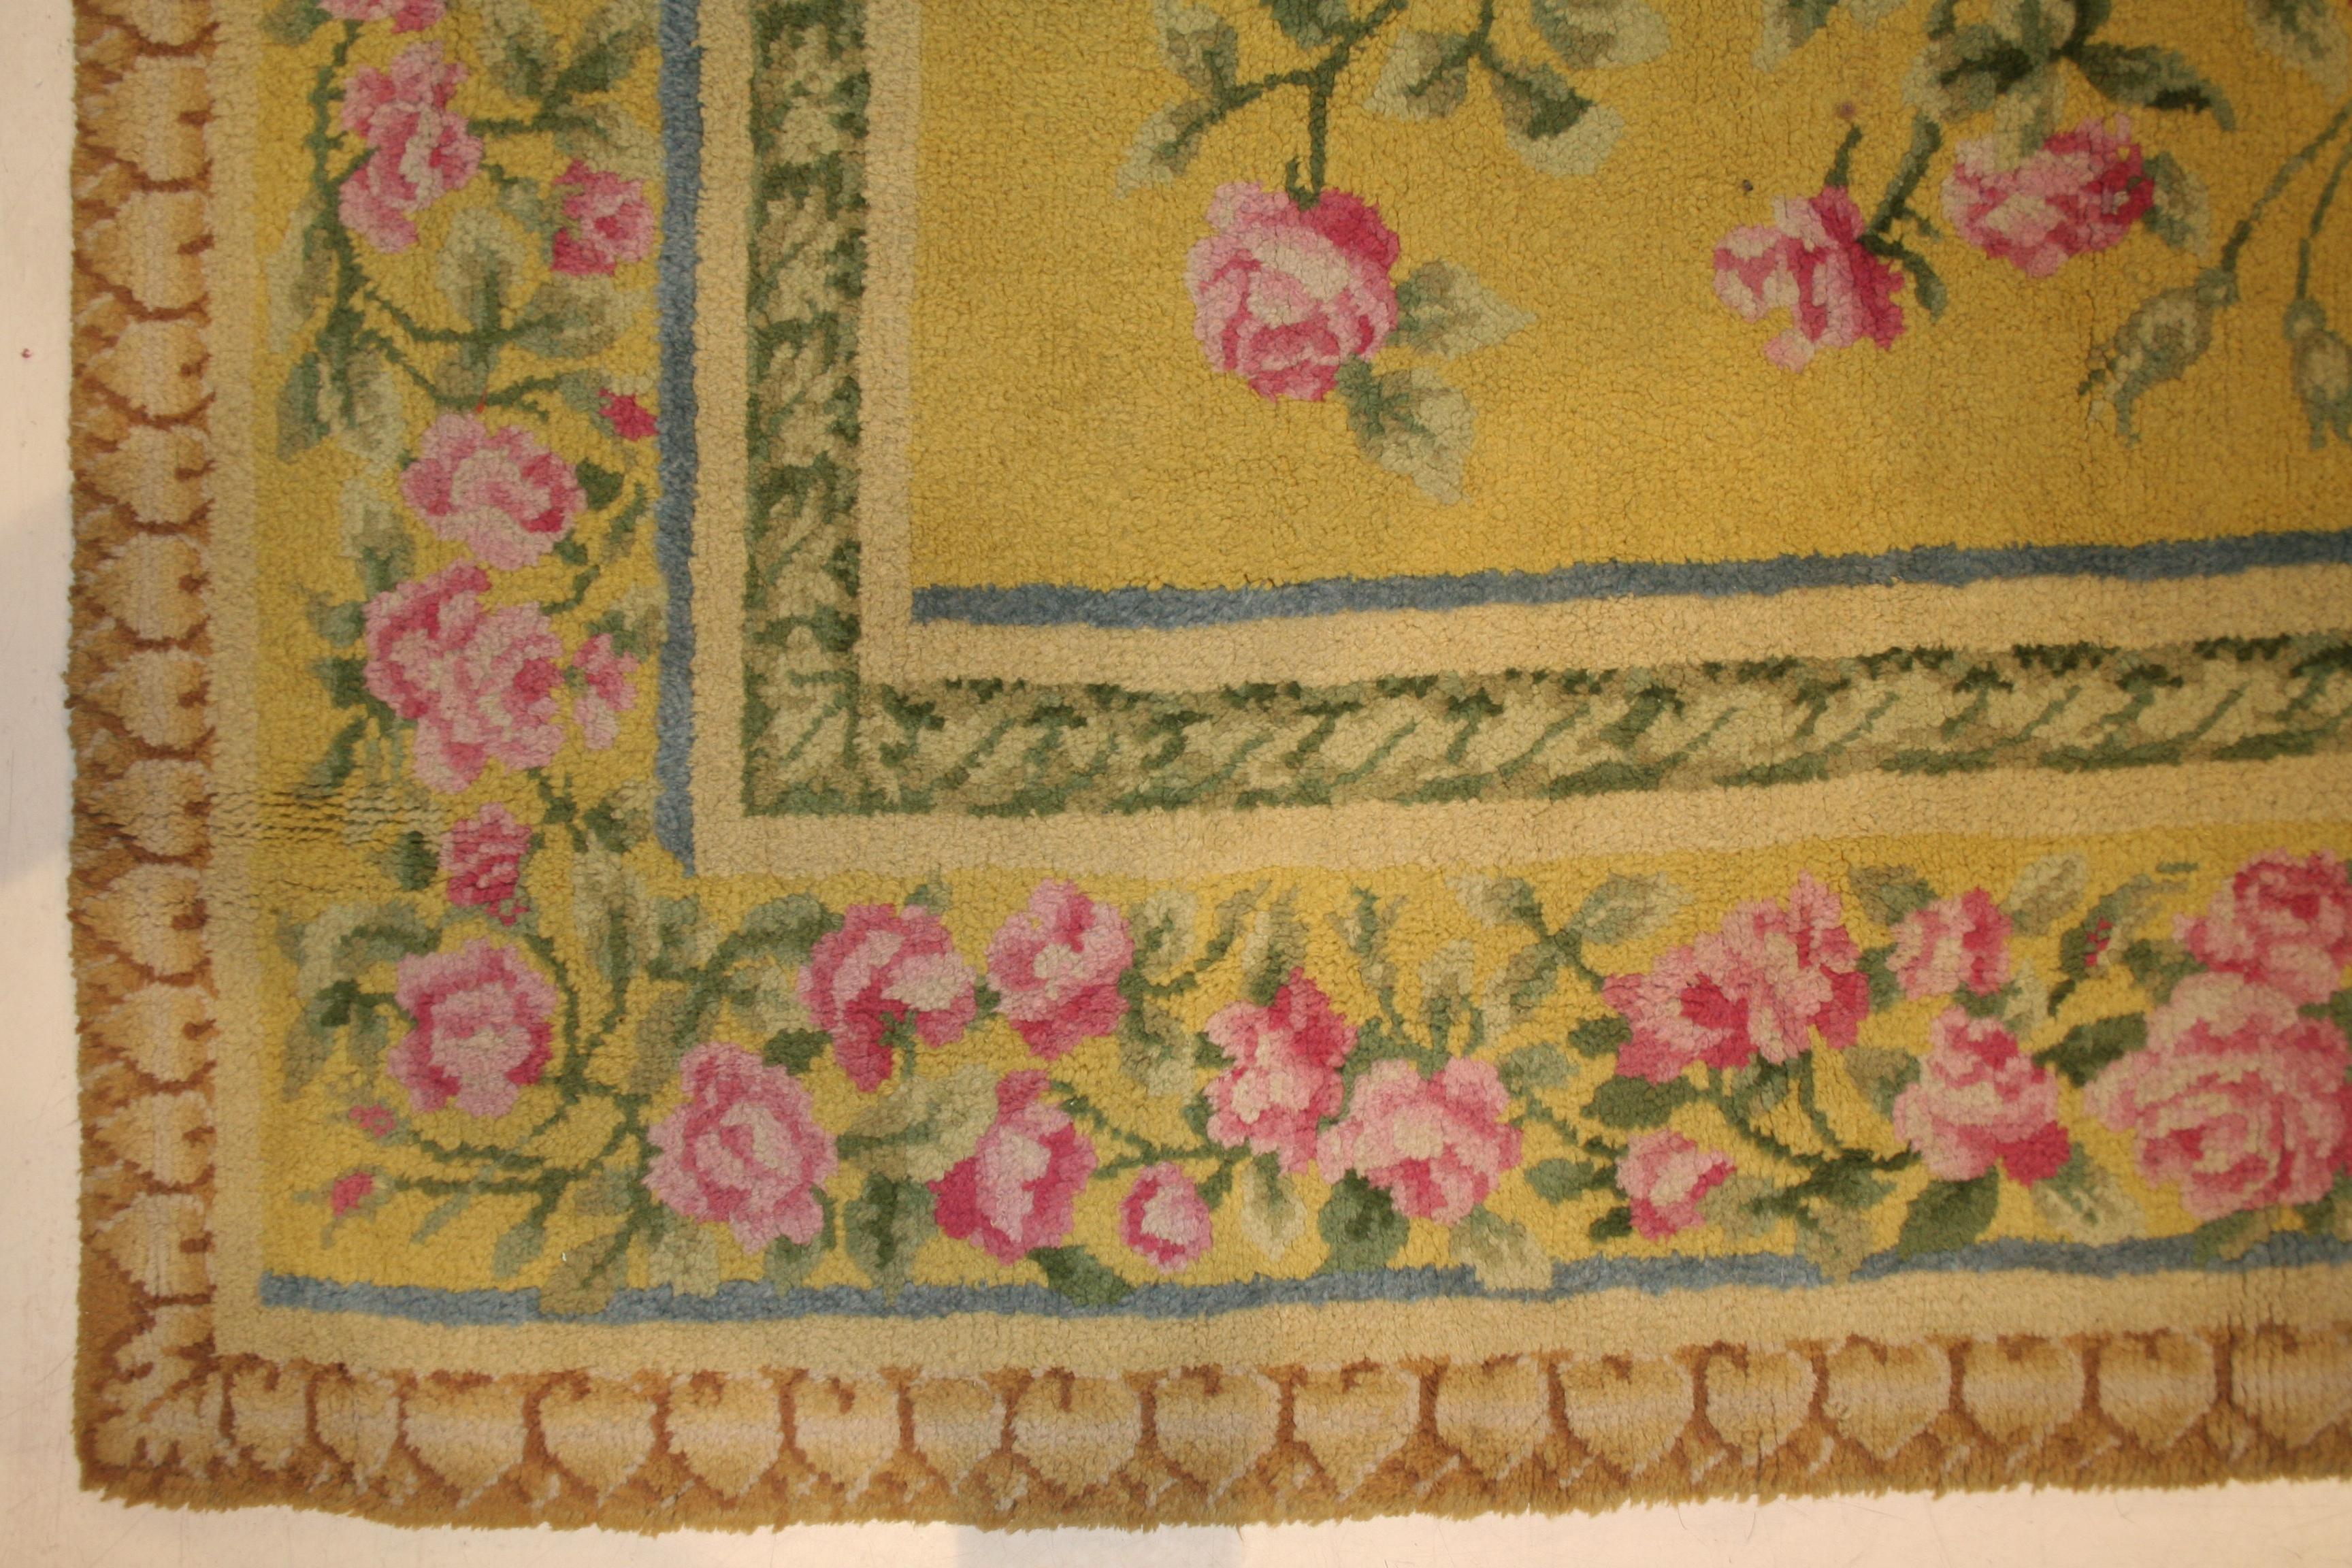 A truly elegant French Art Nouveau rug, characterized by a light yellow background filled with roses arranged on long stems which branch out to its sides and corners. The transition seen here from the formal, Rococo revival motifs of the late 19th